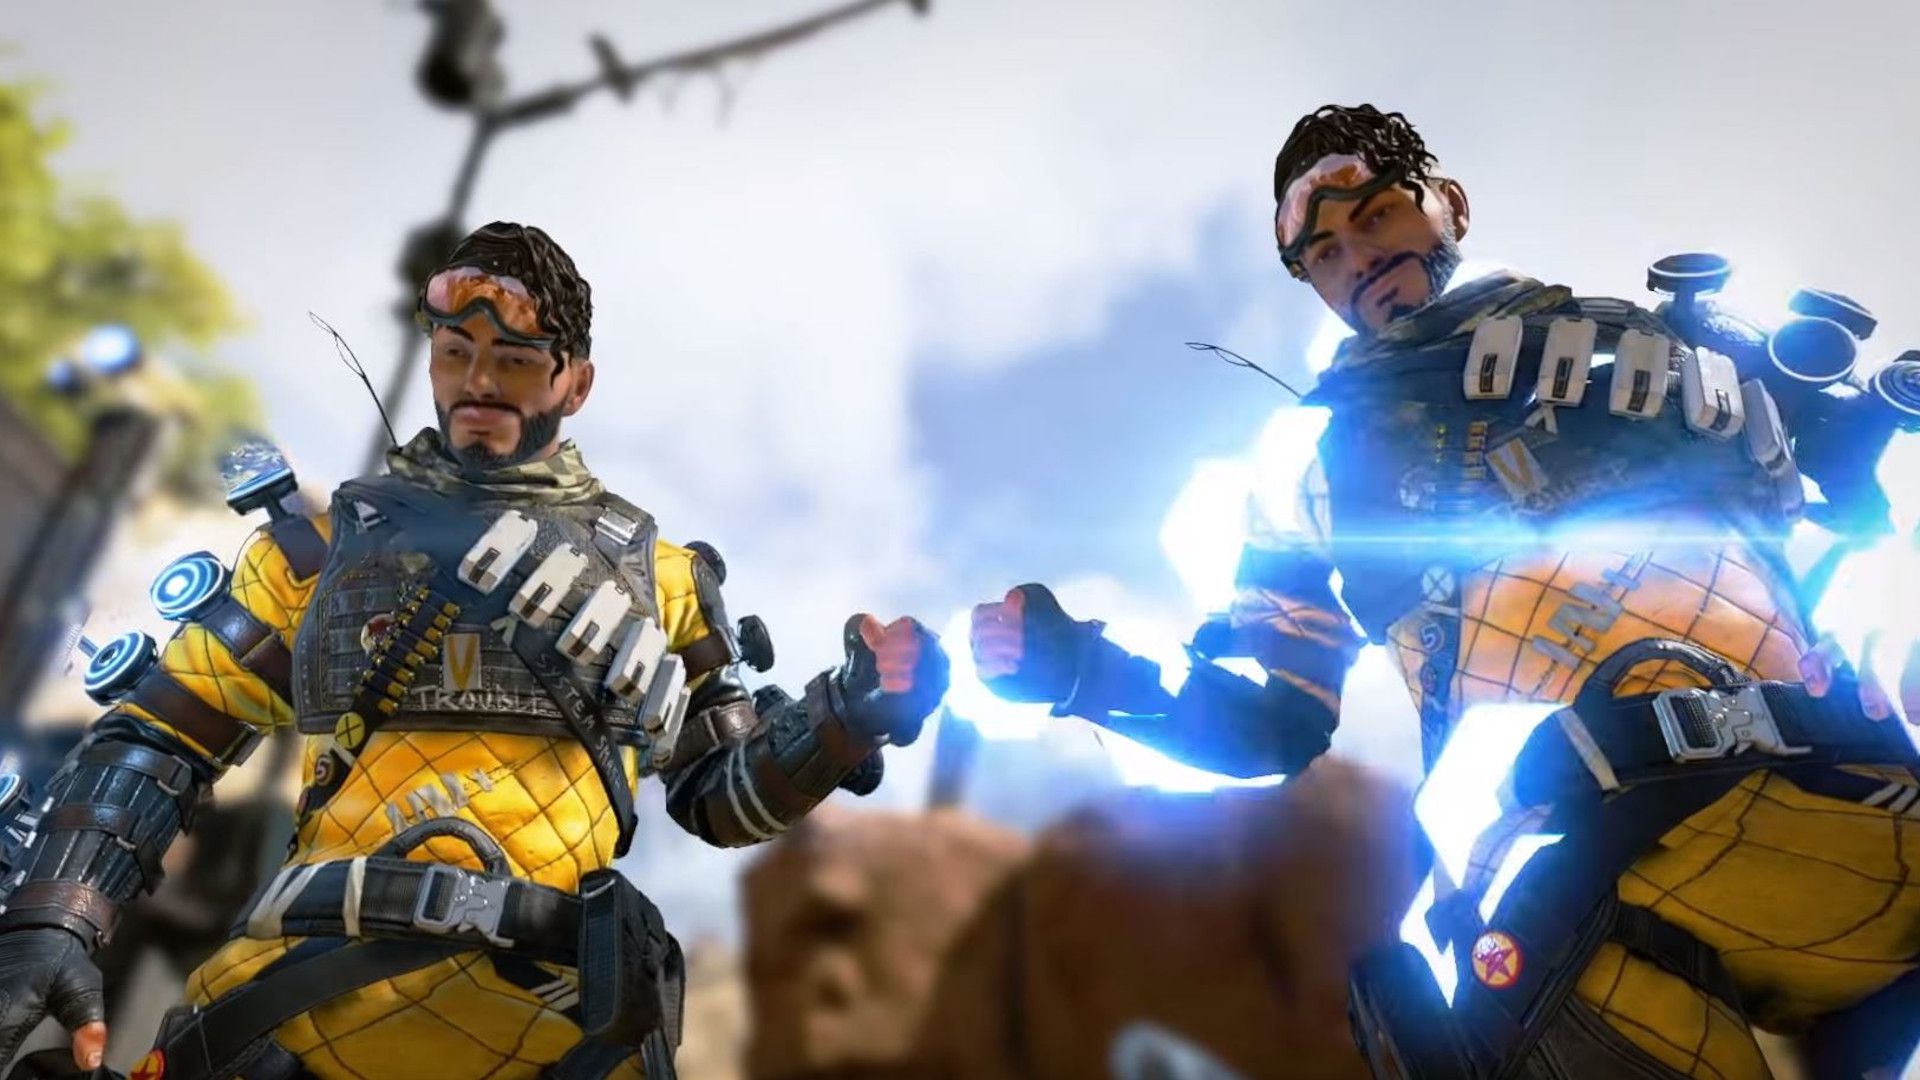 Duos return to Apex Legends for Valentine's Day